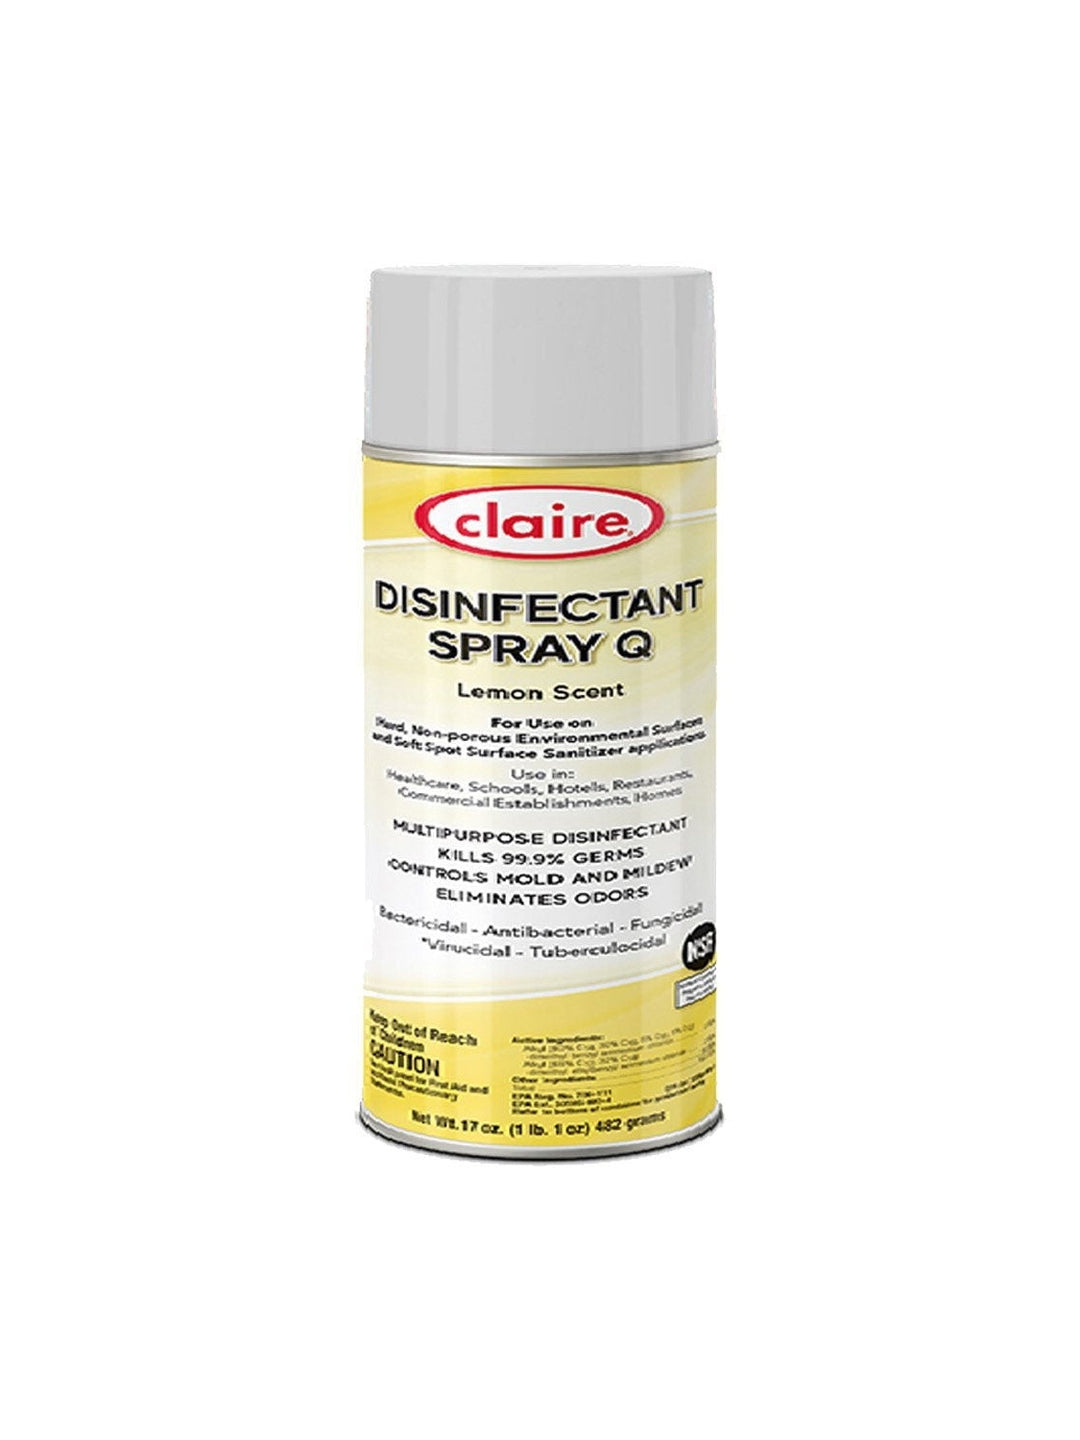 Claire Disinfectant Q Spray - Lemon Scent - The Kennedy Collective Thrift - 